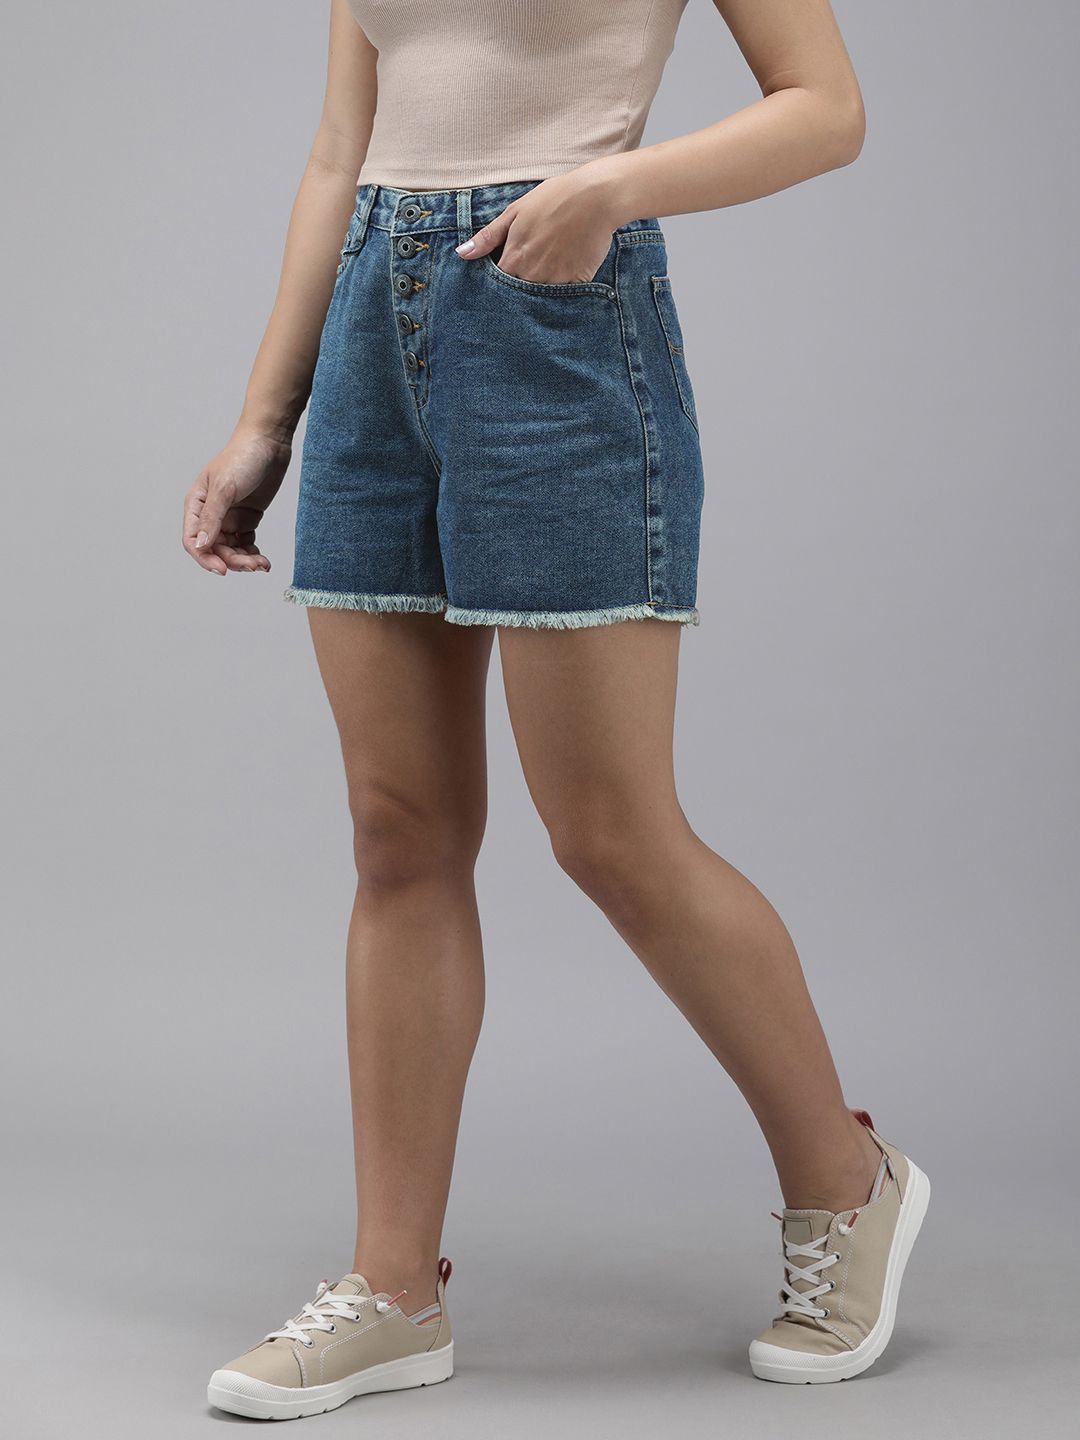 The Roadster Life Co. Women High-Rise Pure Cotton Denim Shorts Price in India